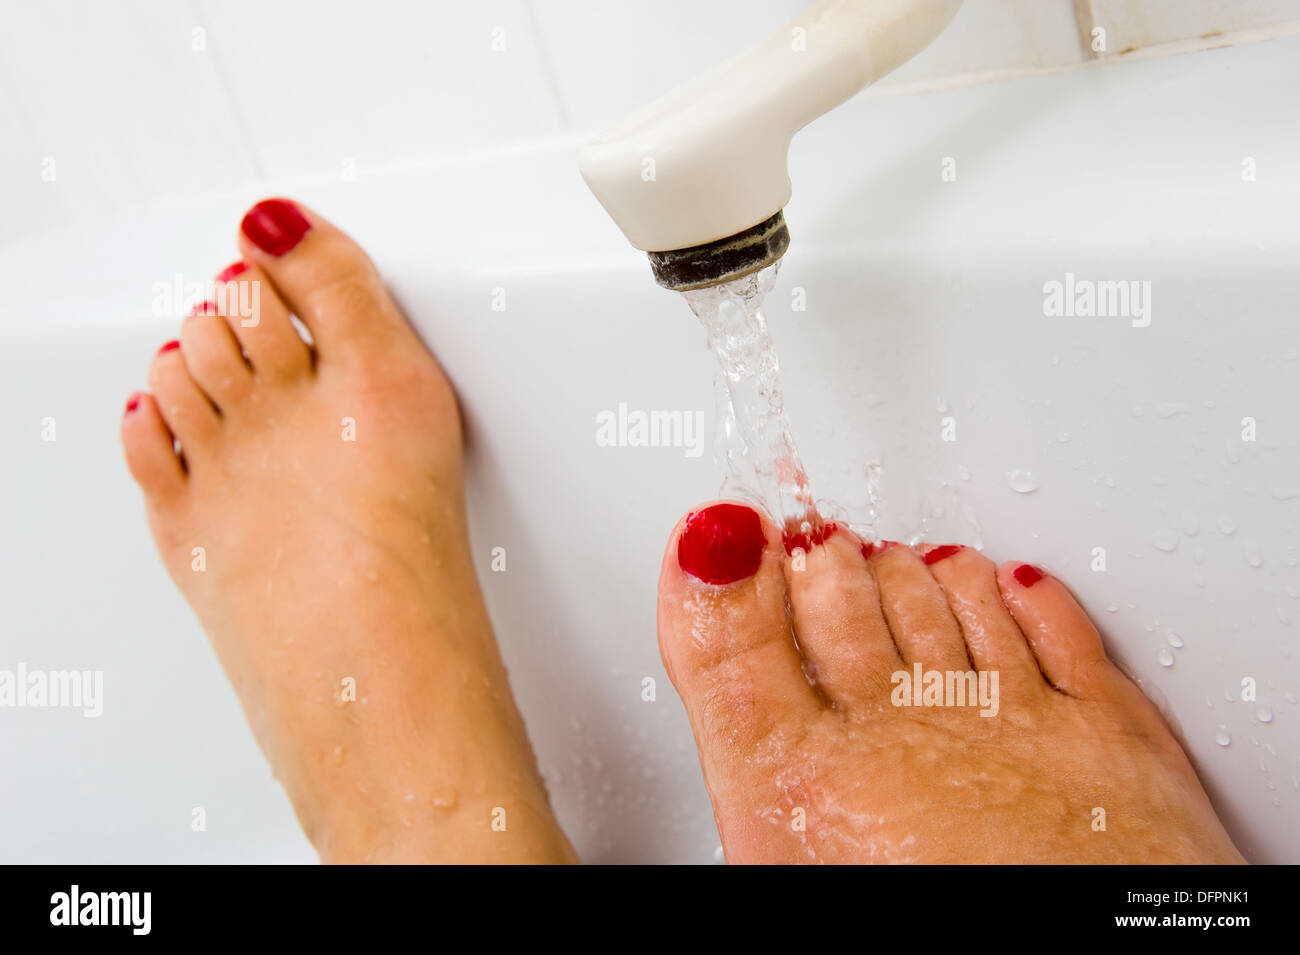 A woman is keeping her foot under the hot water of a bath faucet Stock Photo